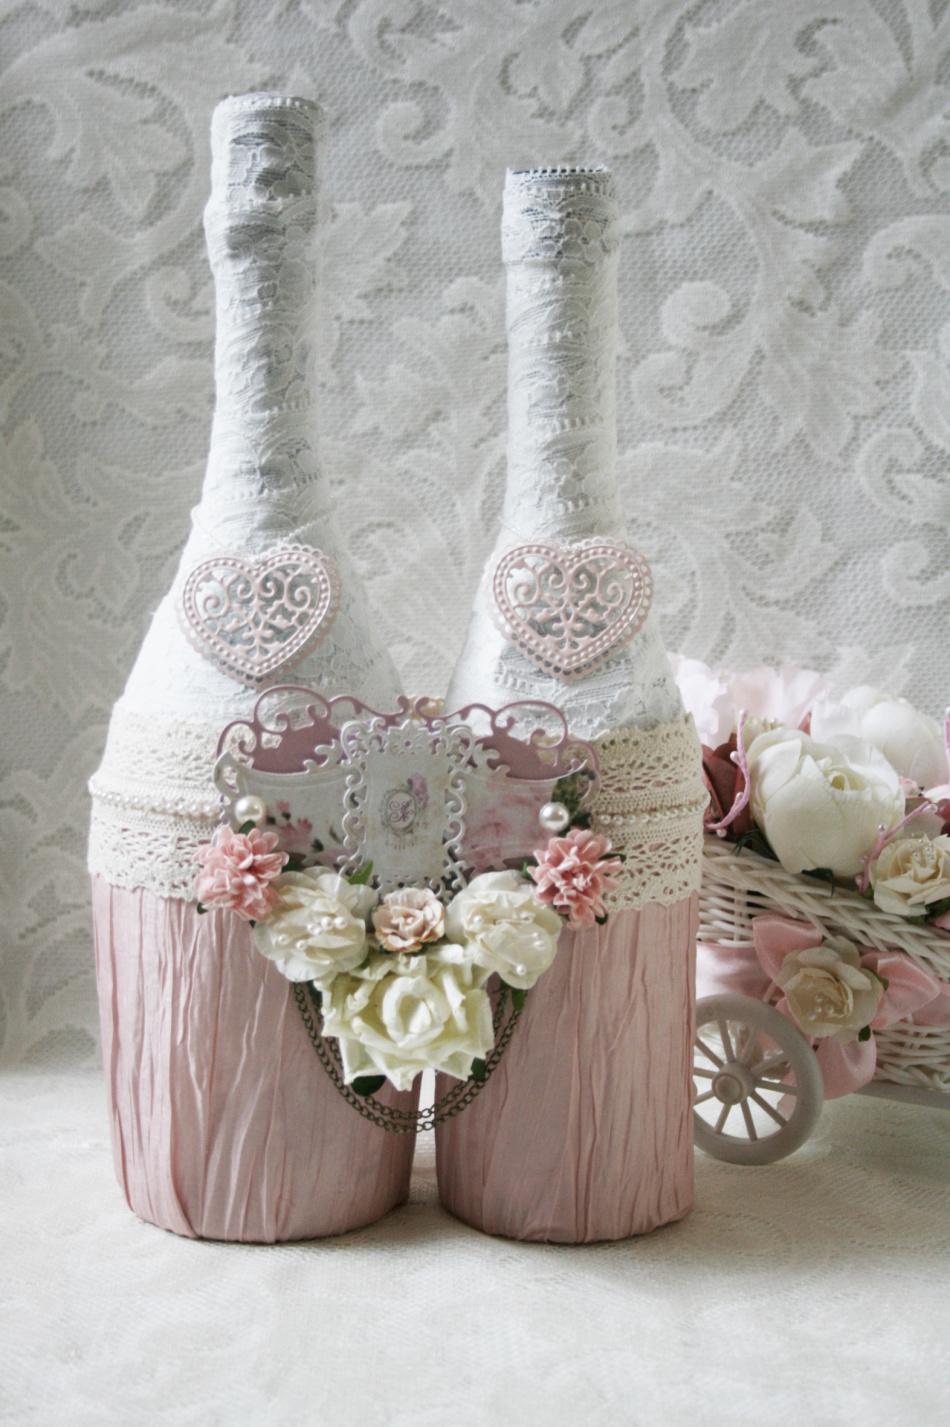 The bottles decorated with decoupage are interconnected as a symbol of marriage strength